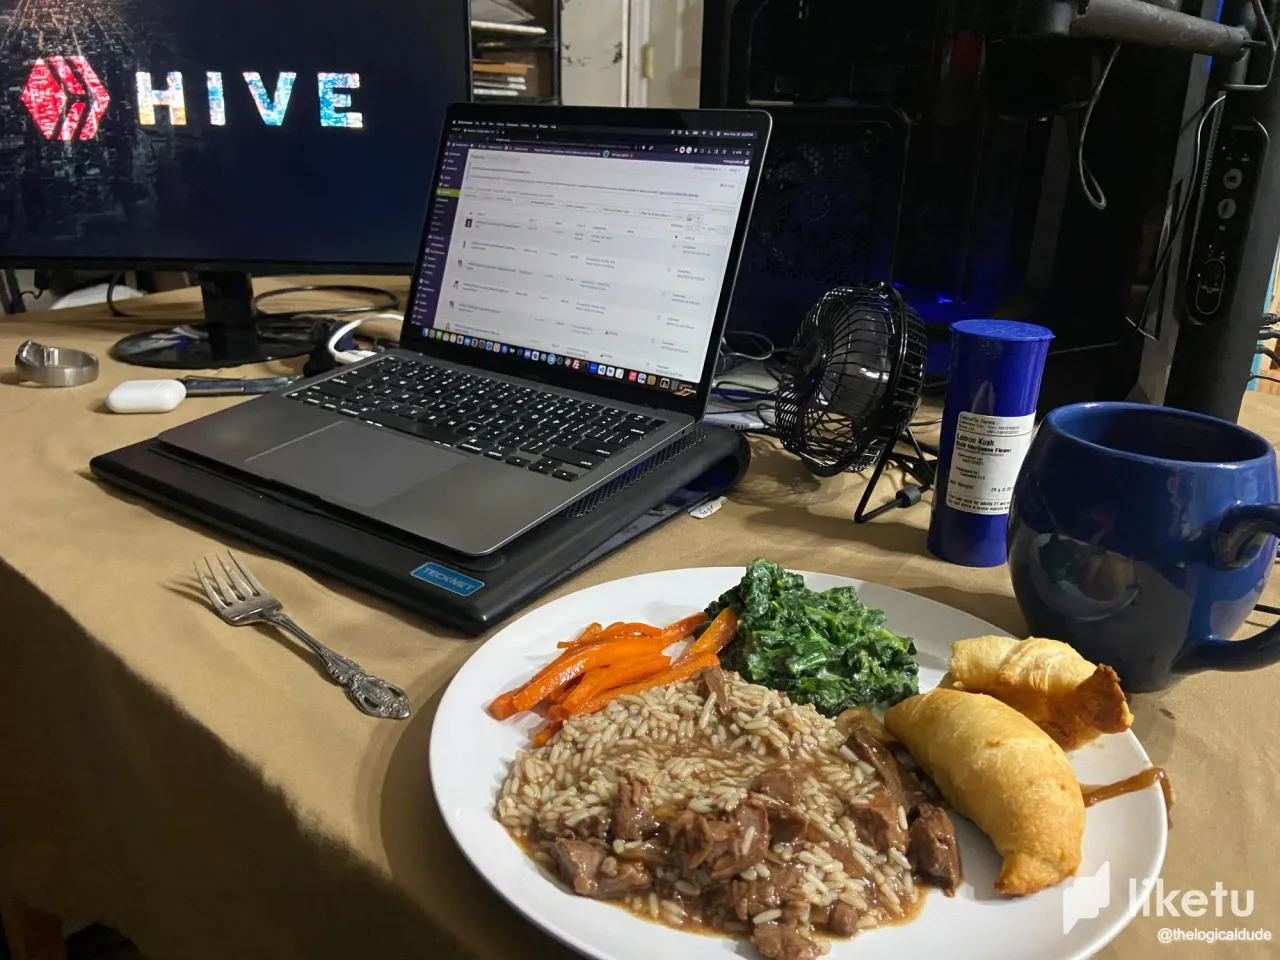 Little Dinner While I Work On The Hivelist Store